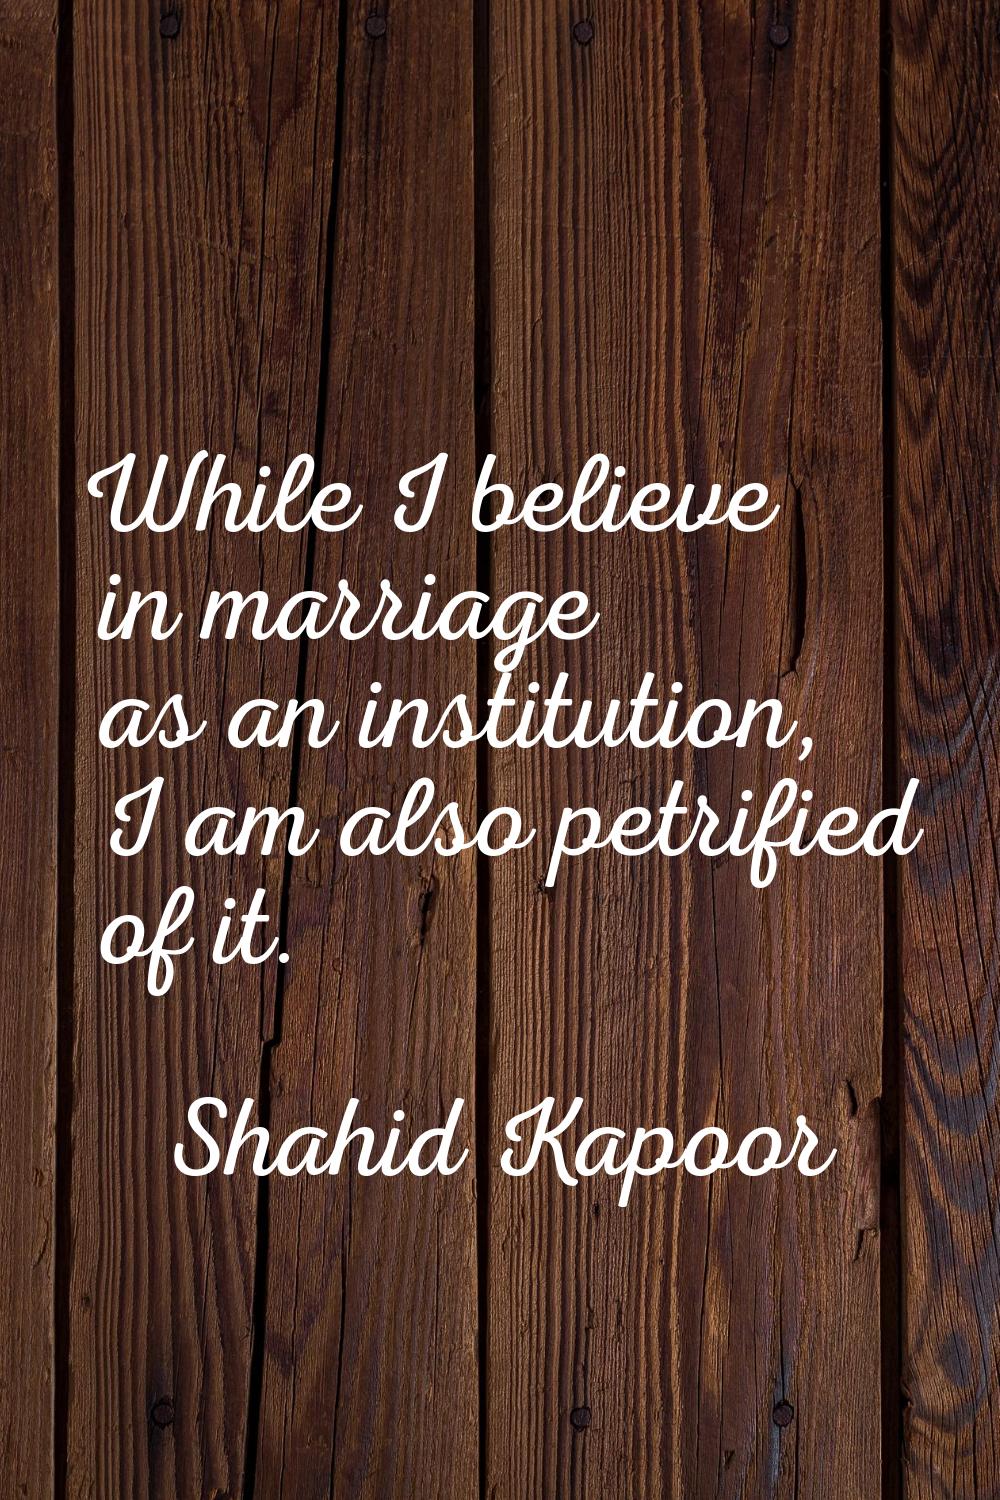 While I believe in marriage as an institution, I am also petrified of it.